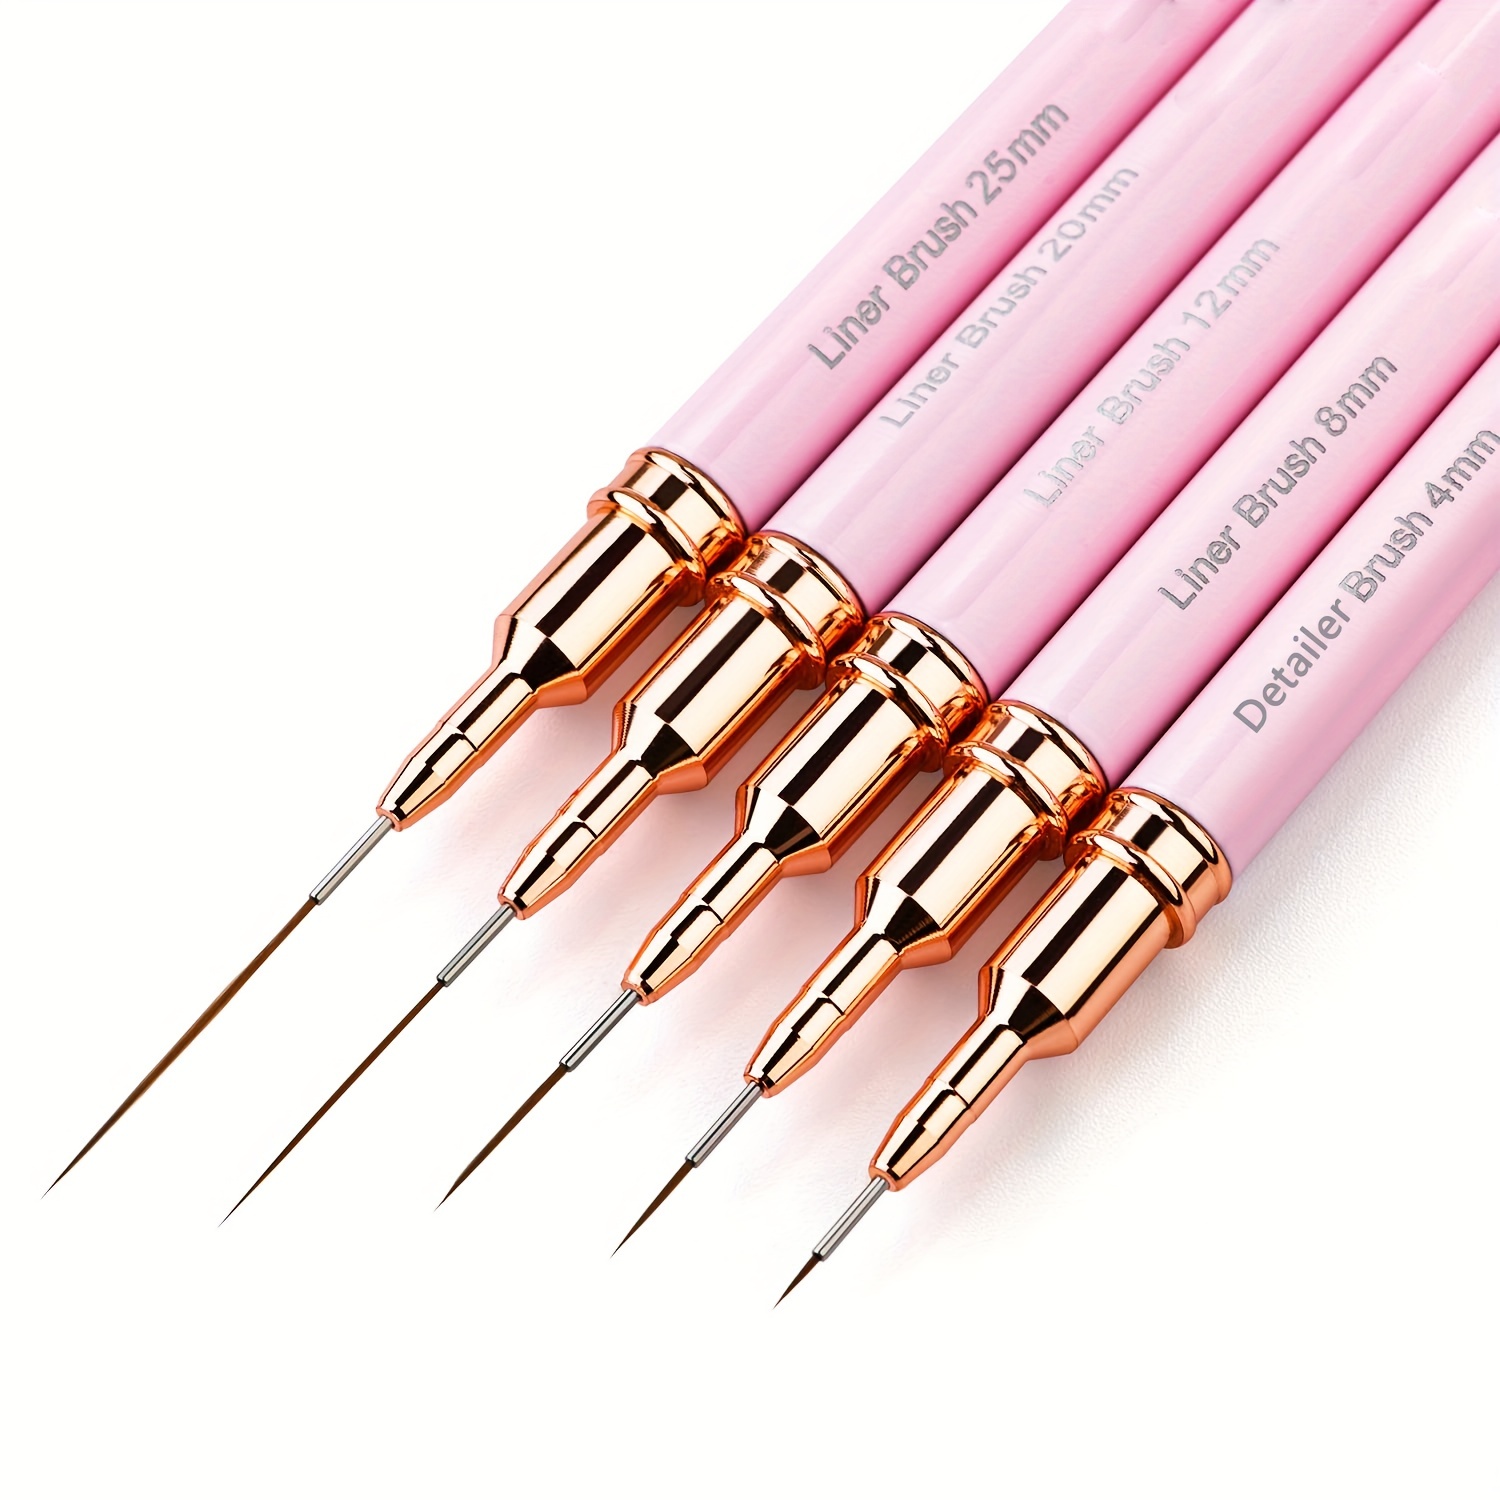 

5pcs Pink Fine Nail Art Brush Set Pens For Long Nails - Perfect For Gel Polish Painting And Manicure - Includes 5 Sizes (4/8/12/20/25mm) - Details Nail Art Designs Free Of Acetone